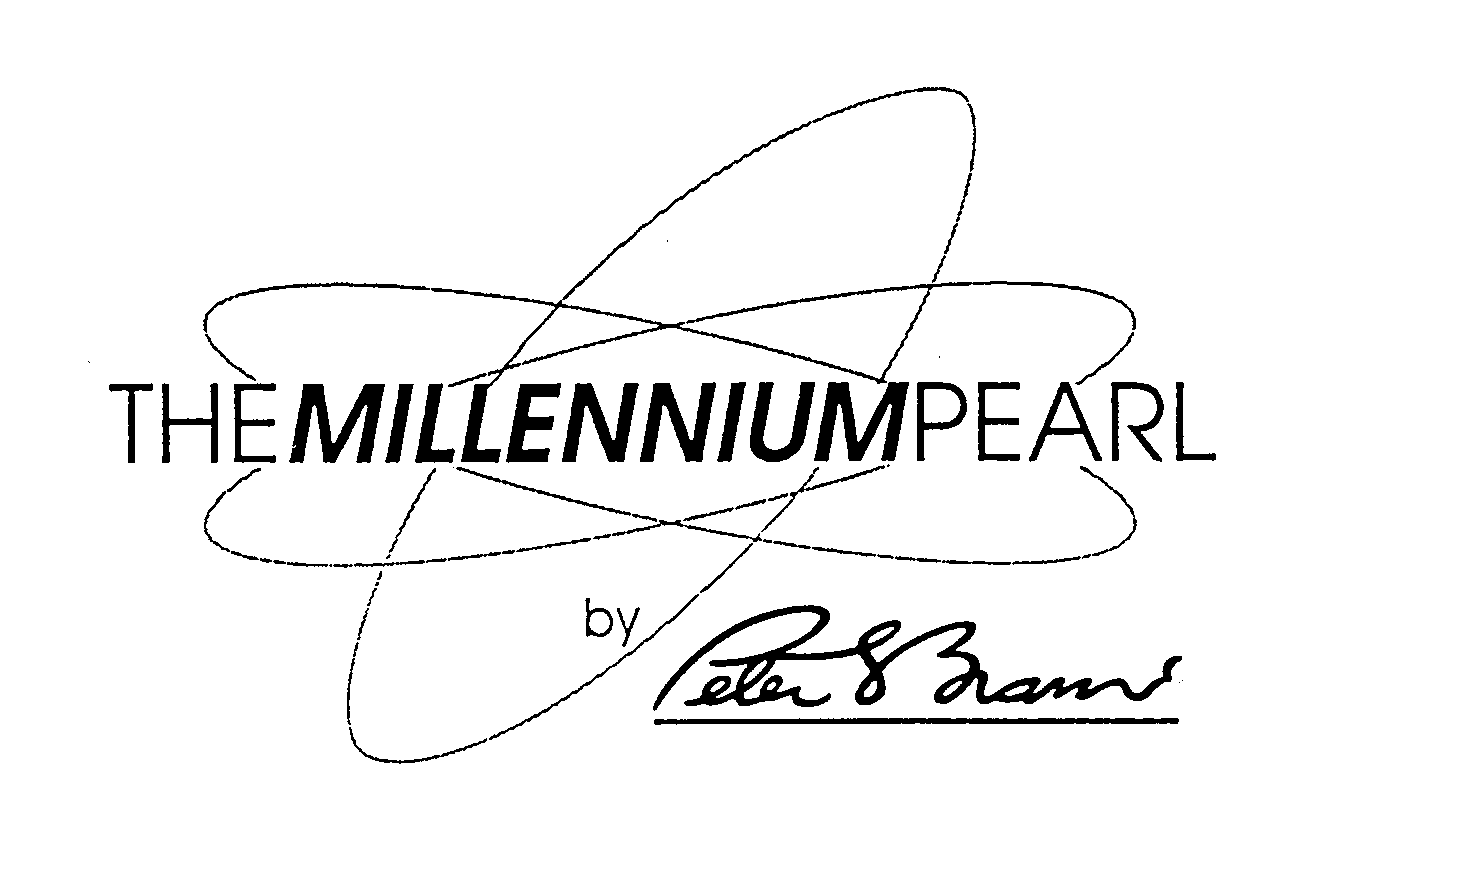  THE MILLENNIUM PEARL BY PETER S. BRAMS